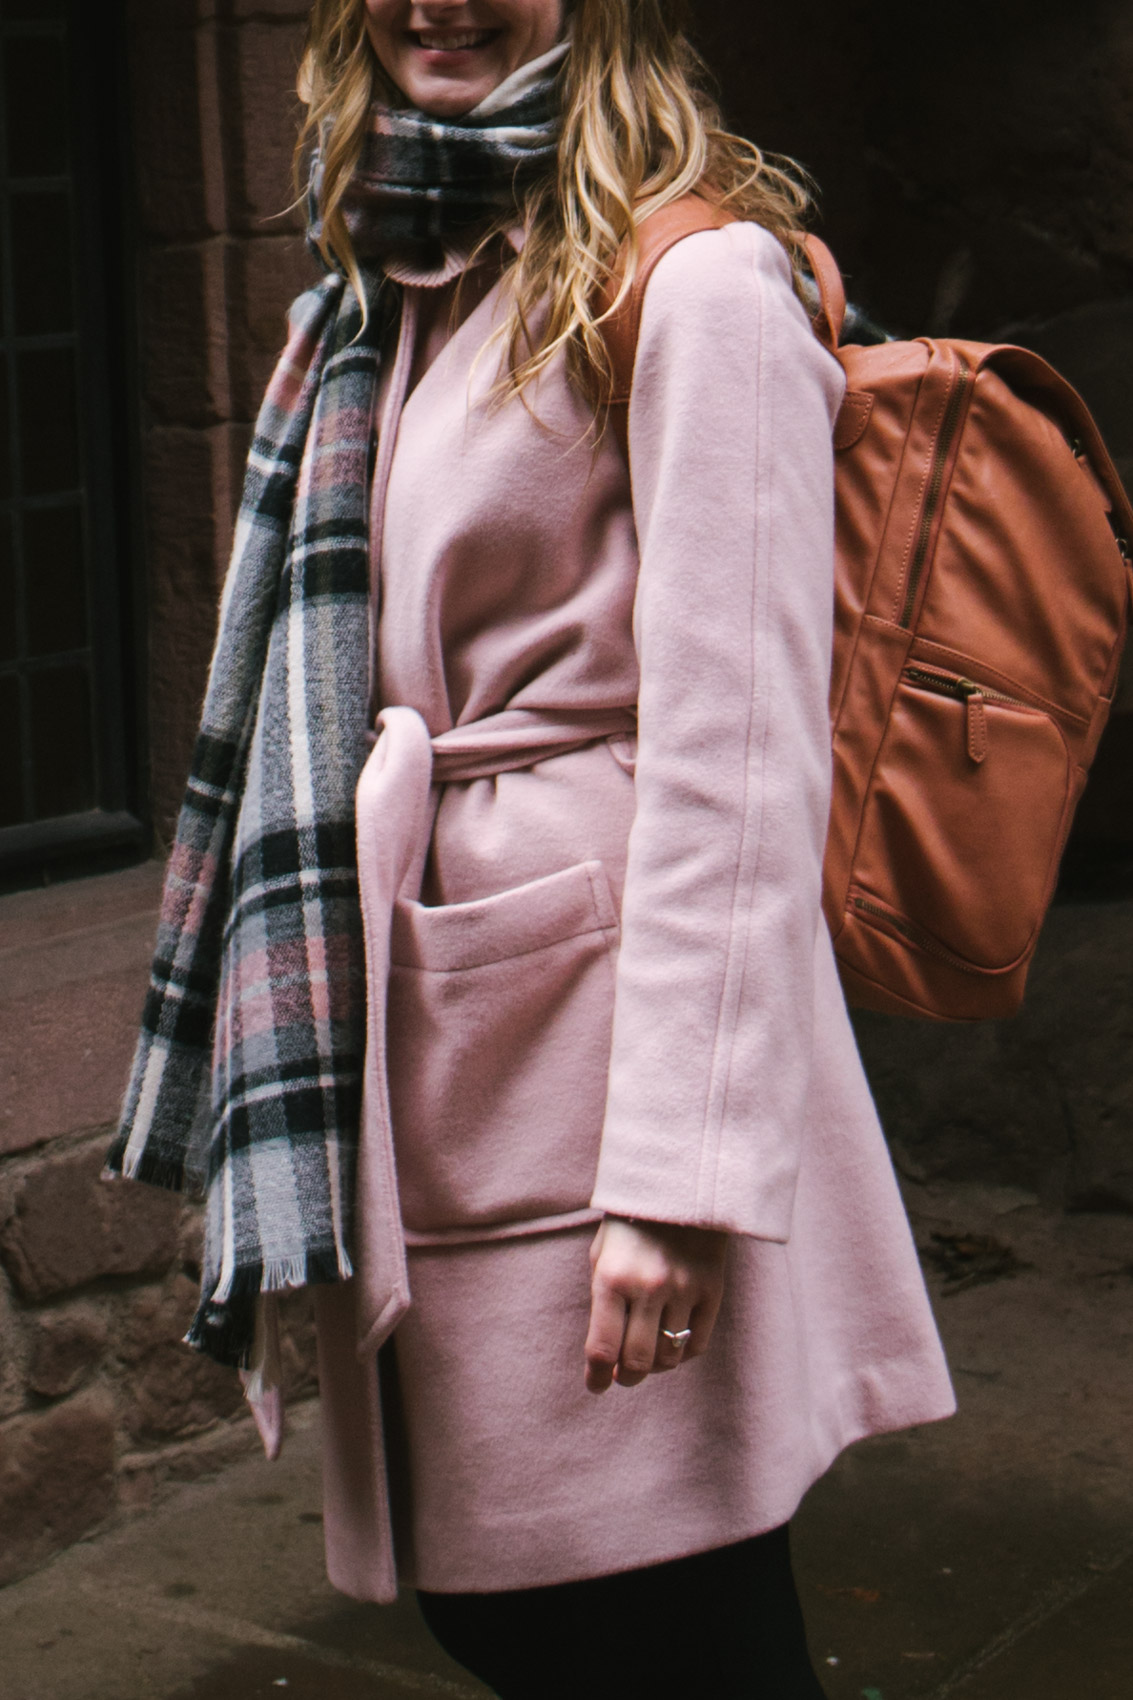 Styling a blush pink coat in the winter.